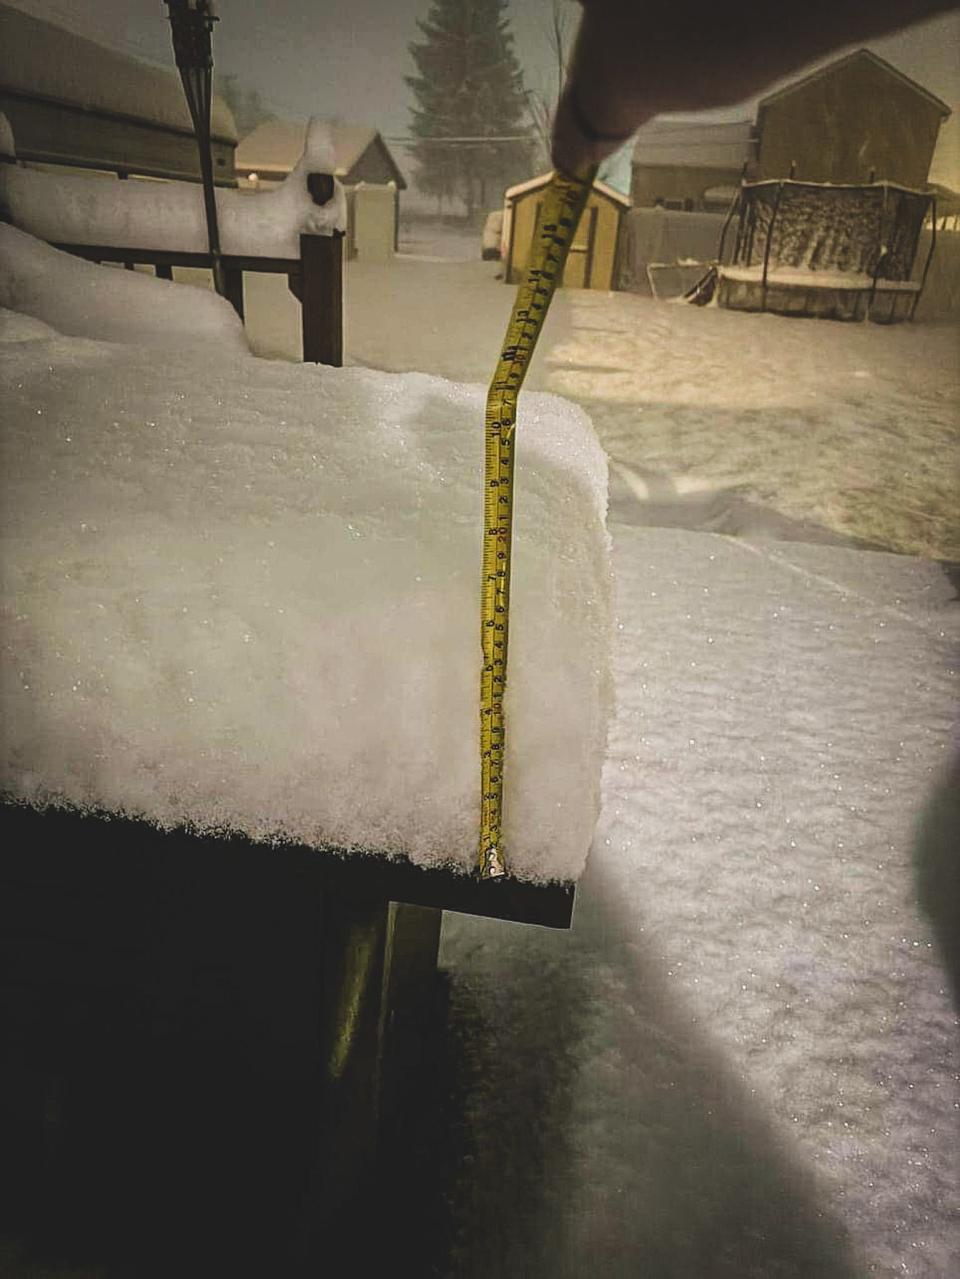 A snowfall measurement Friday night in Newcomerstown.